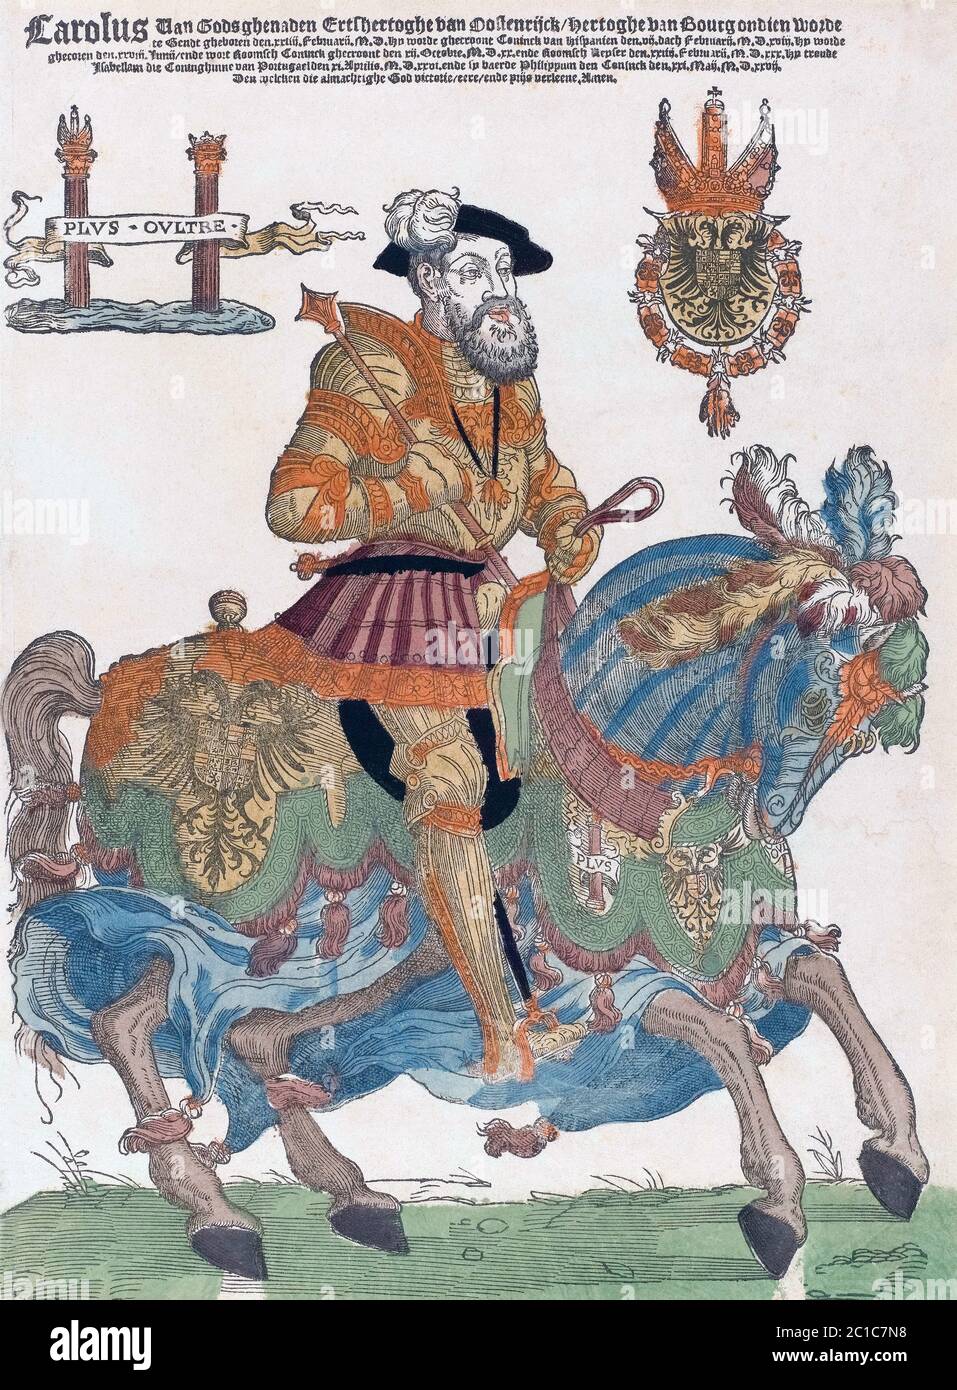 Charles V, 1500-1558.  Emperor of the Holy Roman Empire.  Carlos V.  King of Spain as Charles I. Carlos I.   After a work possibly by Cornelis Anthonisz. Stock Photo